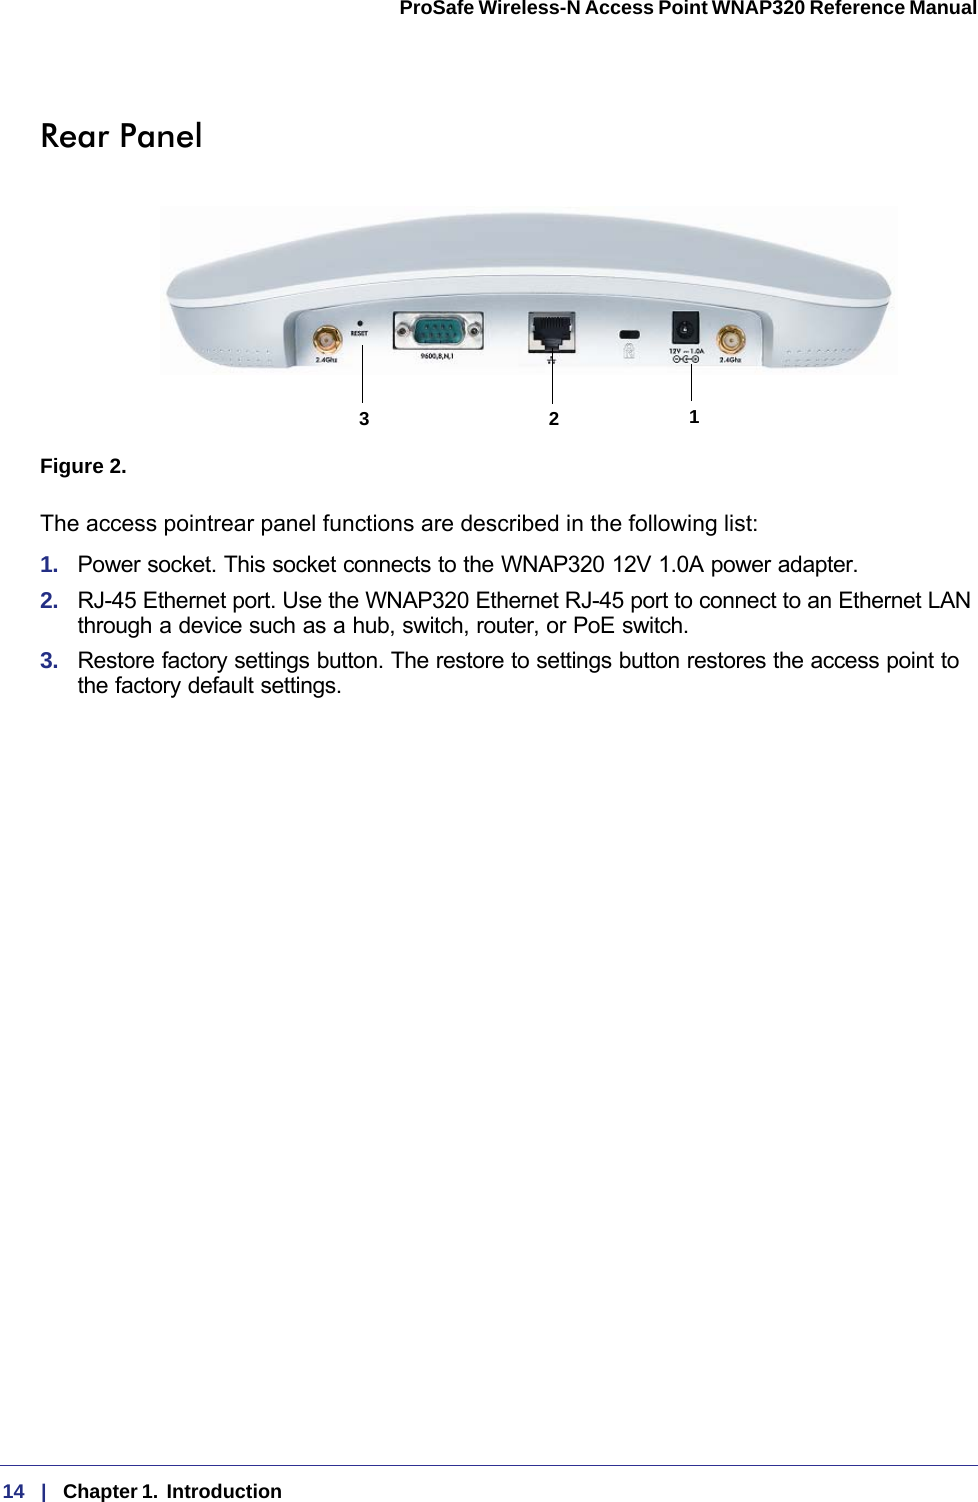 14   |   Chapter 1.  Introduction  ProSafe Wireless-N Access Point WNAP320 Reference Manual Rear Panel132Figure 2. The access pointrear panel functions are described in the following list:1.  Power socket. This socket connects to the WNAP320 12V 1.0A power adapter.2.  RJ-45 Ethernet port. Use the WNAP320 Ethernet RJ-45 port to connect to an Ethernet LAN through a device such as a hub, switch, router, or PoE switch.3.  Restore factory settings button. The restore to settings button restores the access point to the factory default settings.